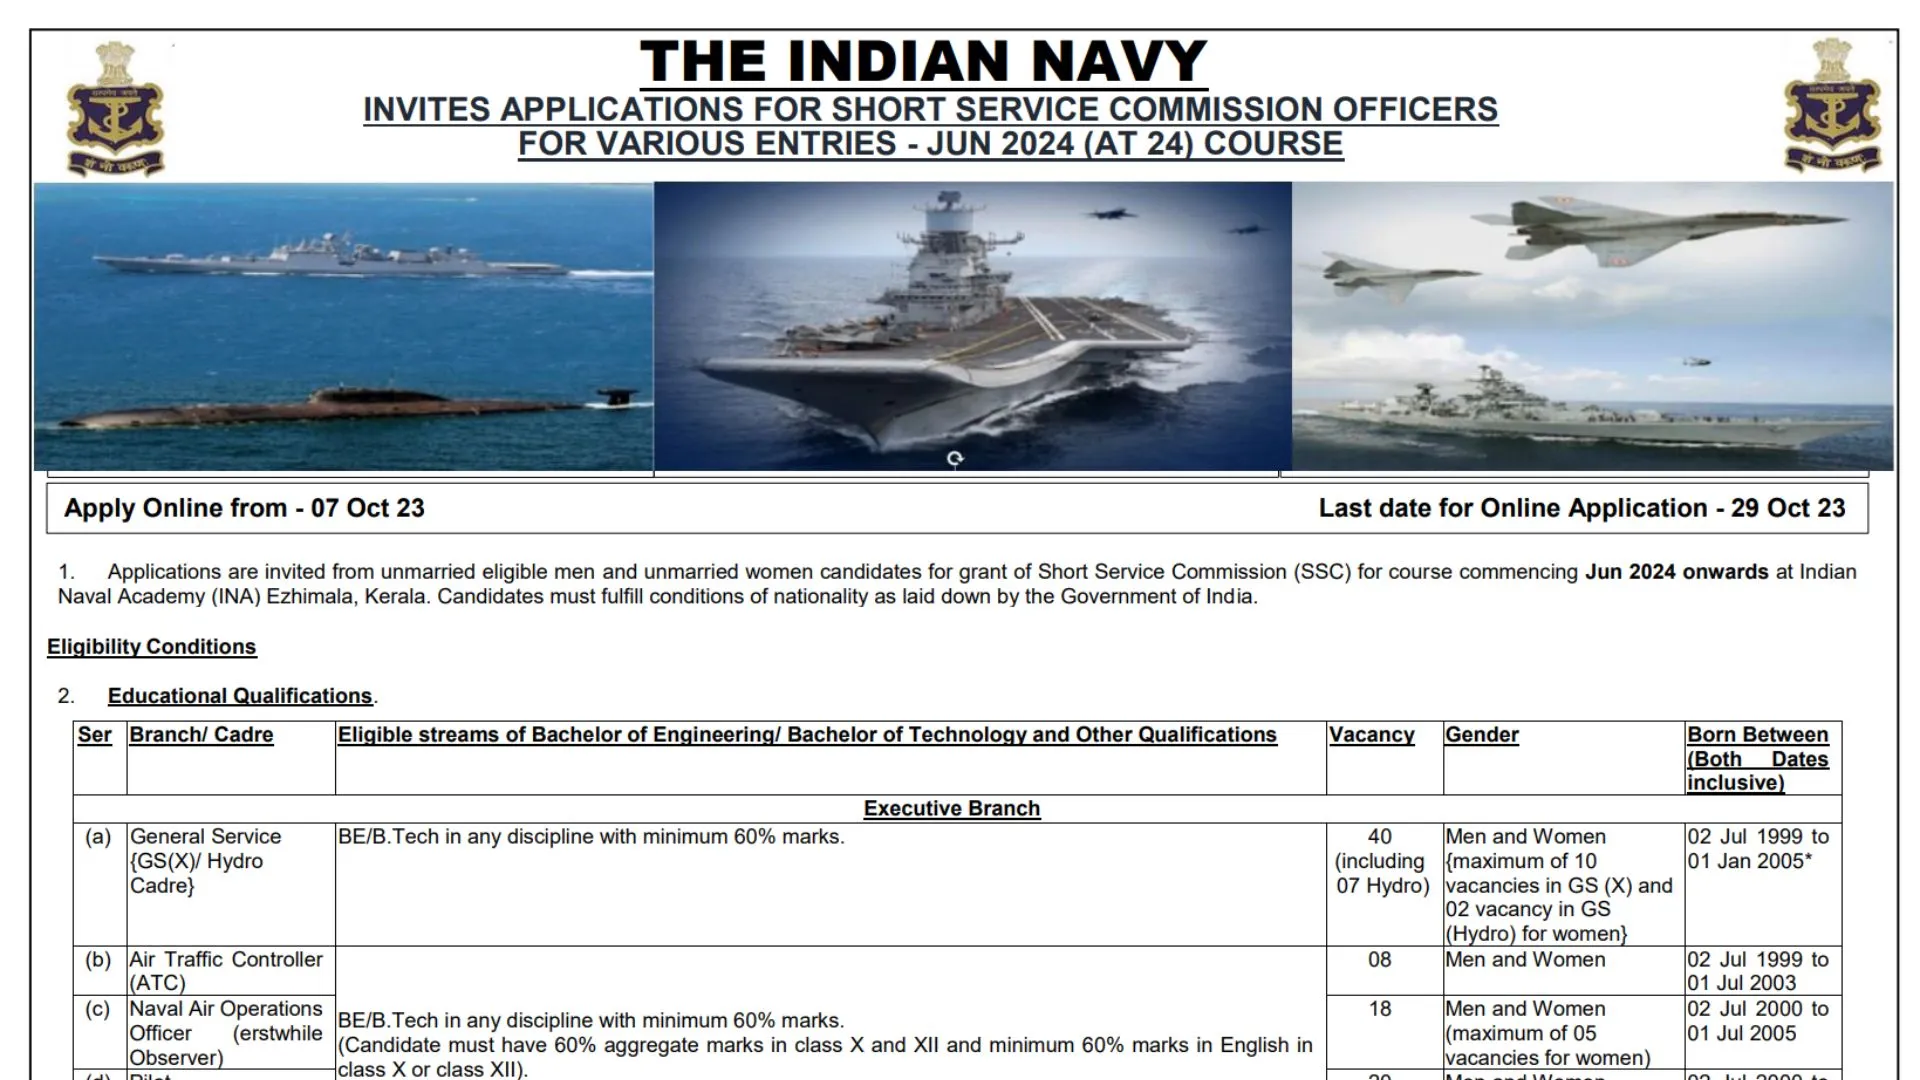 Indian Navy SSC Officer Recruitment 2023 Notification Released, Apply Online